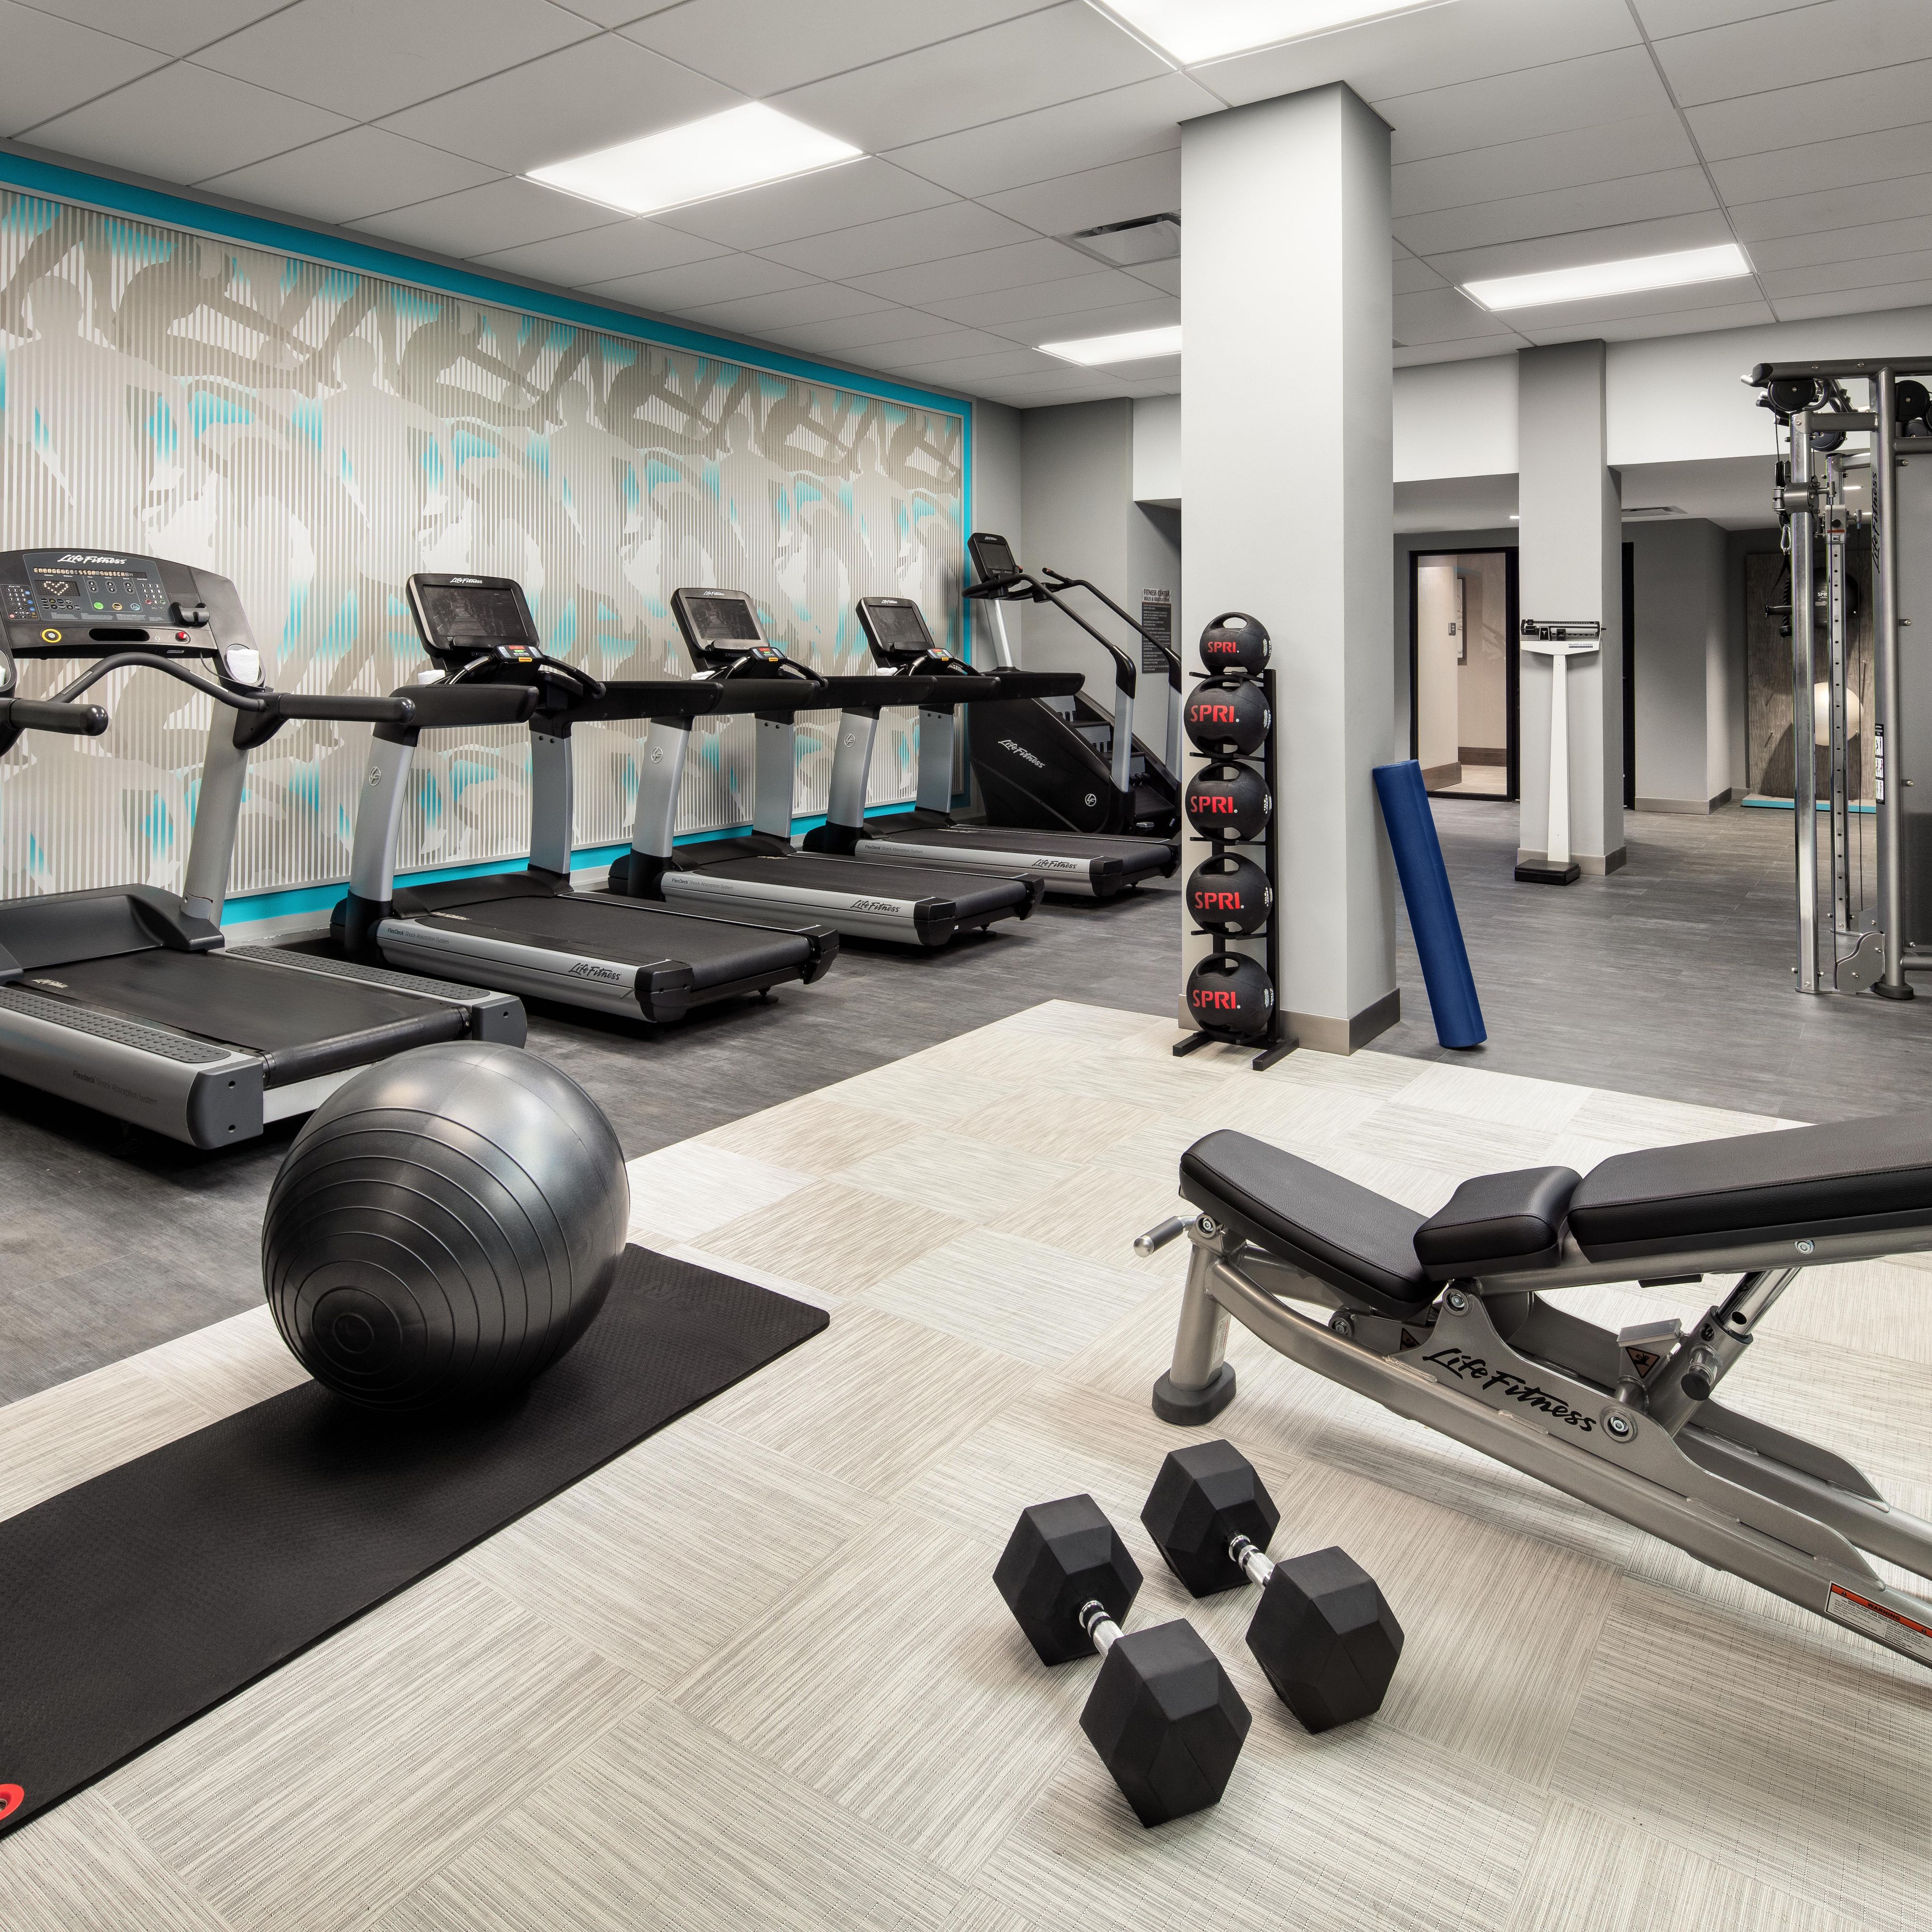 Stimulate your mind and body at our new fitness center.